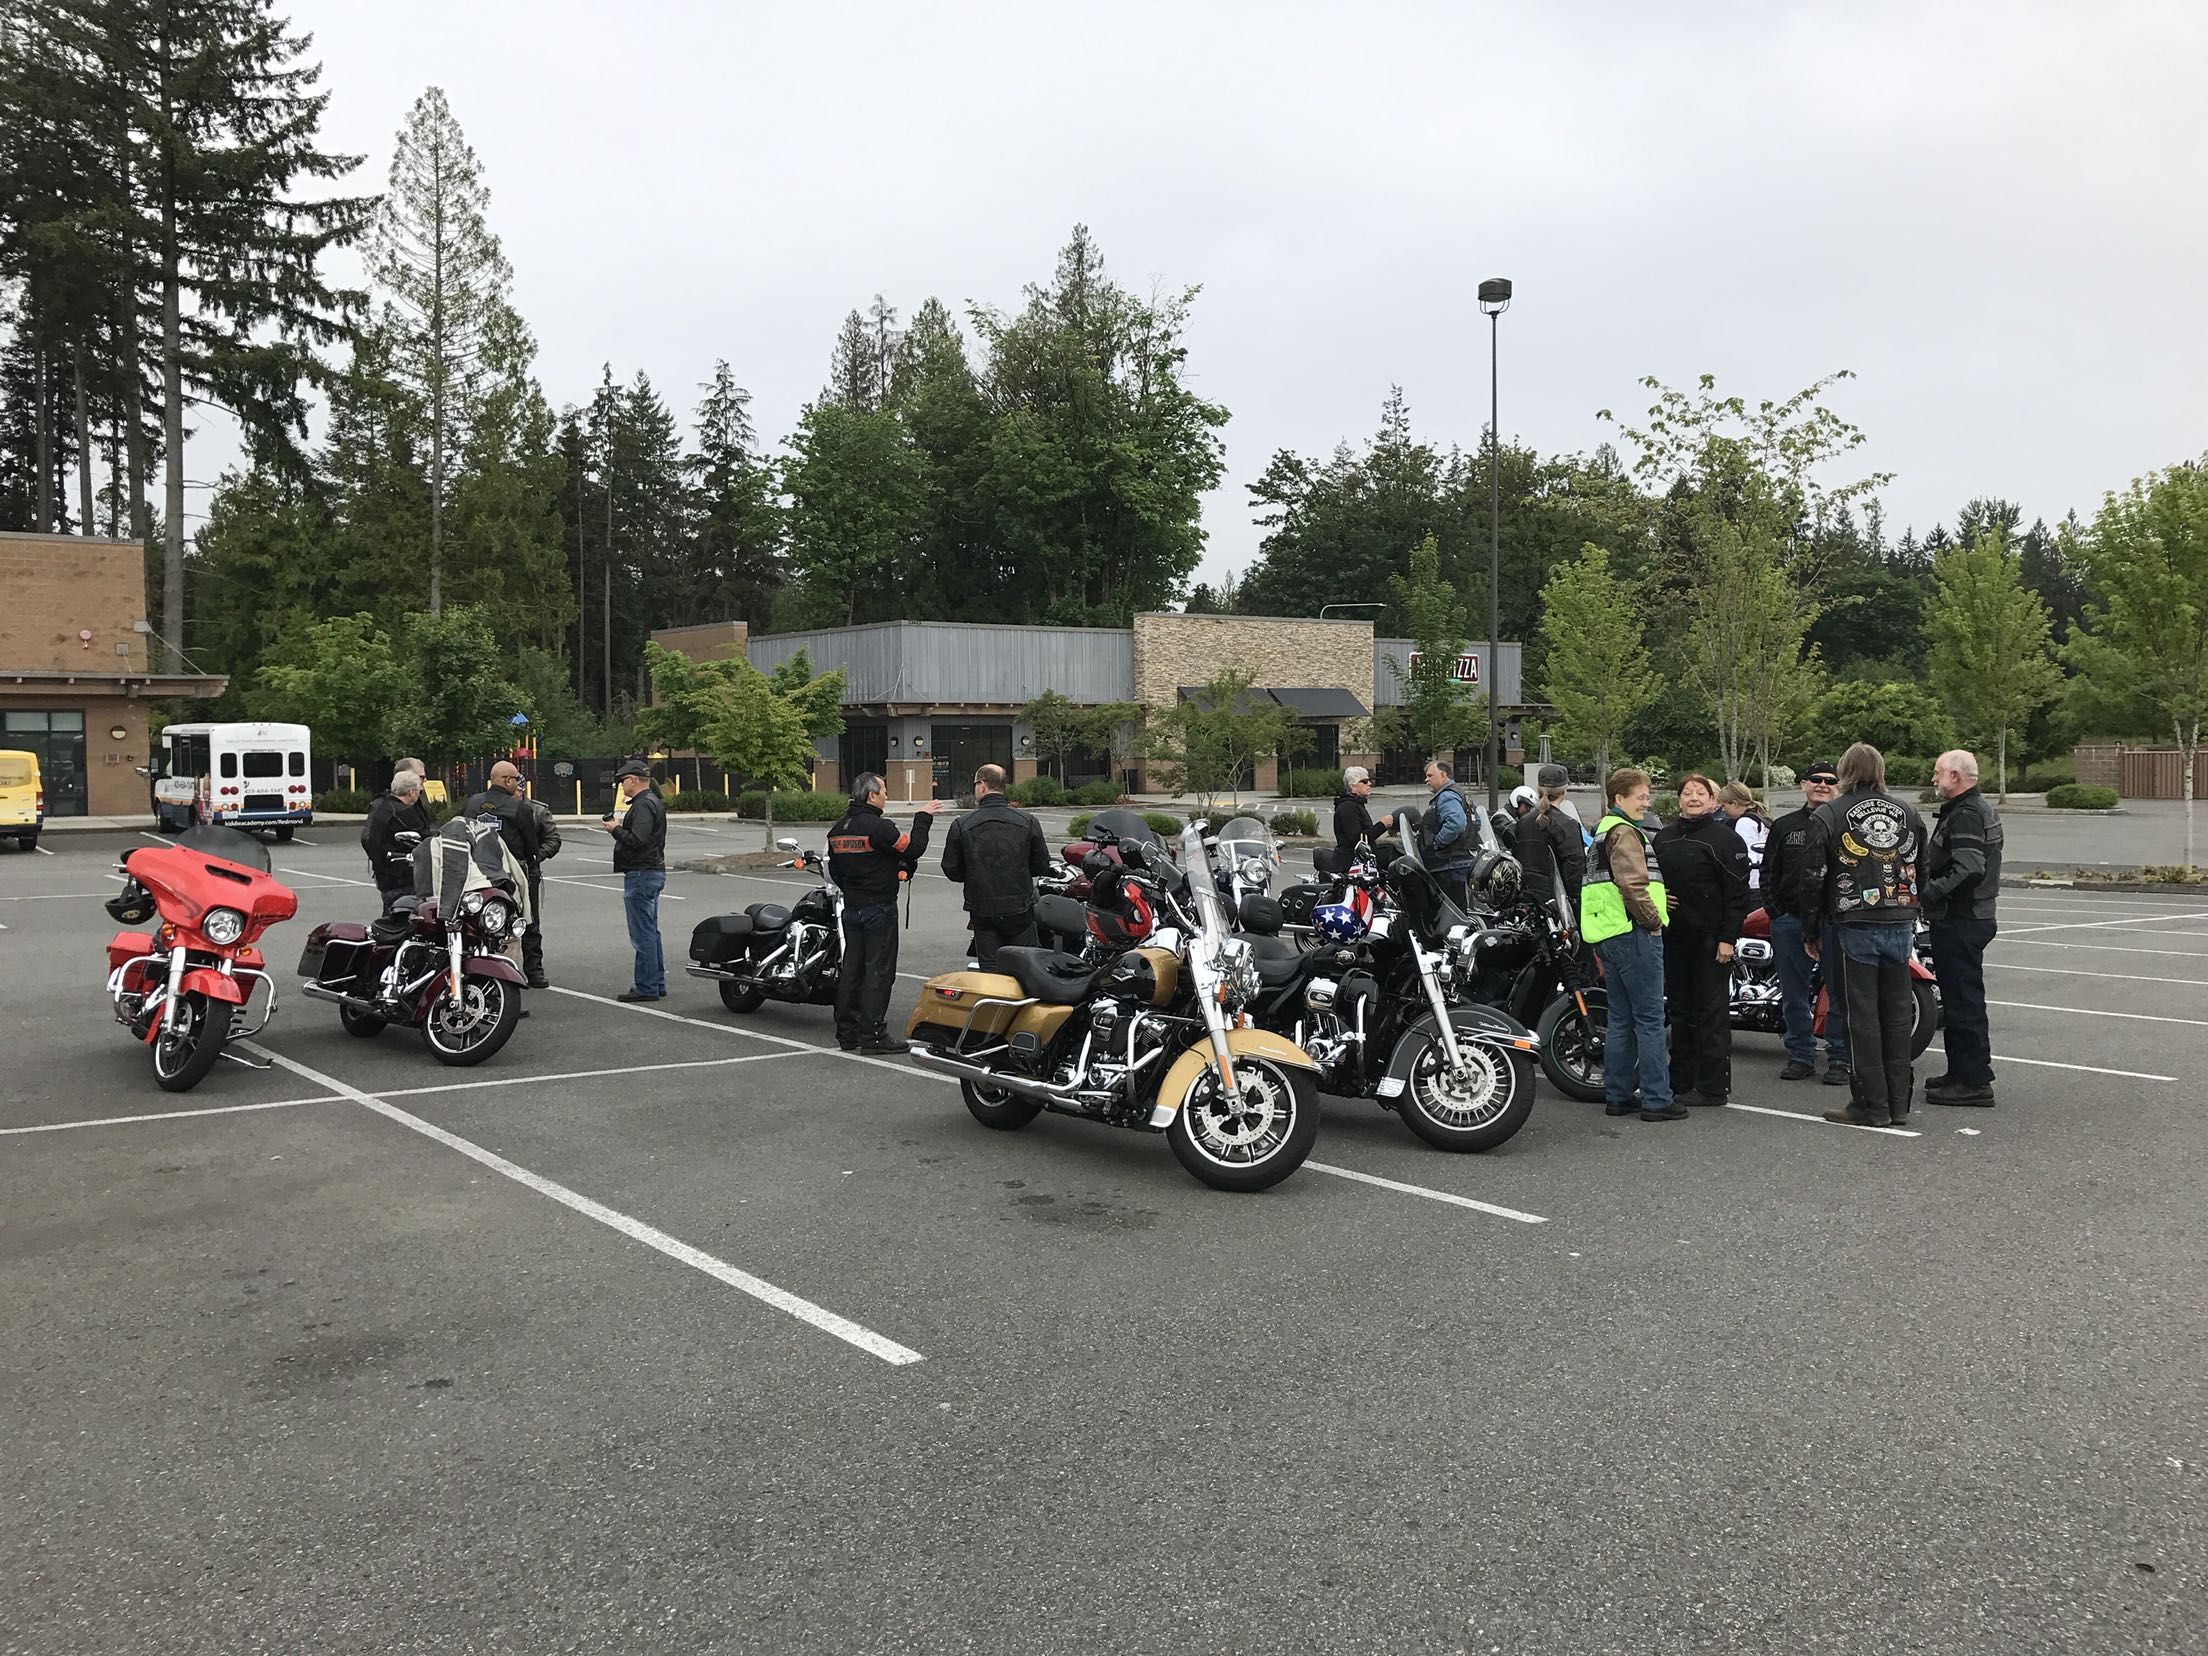 Group gathered before the ride